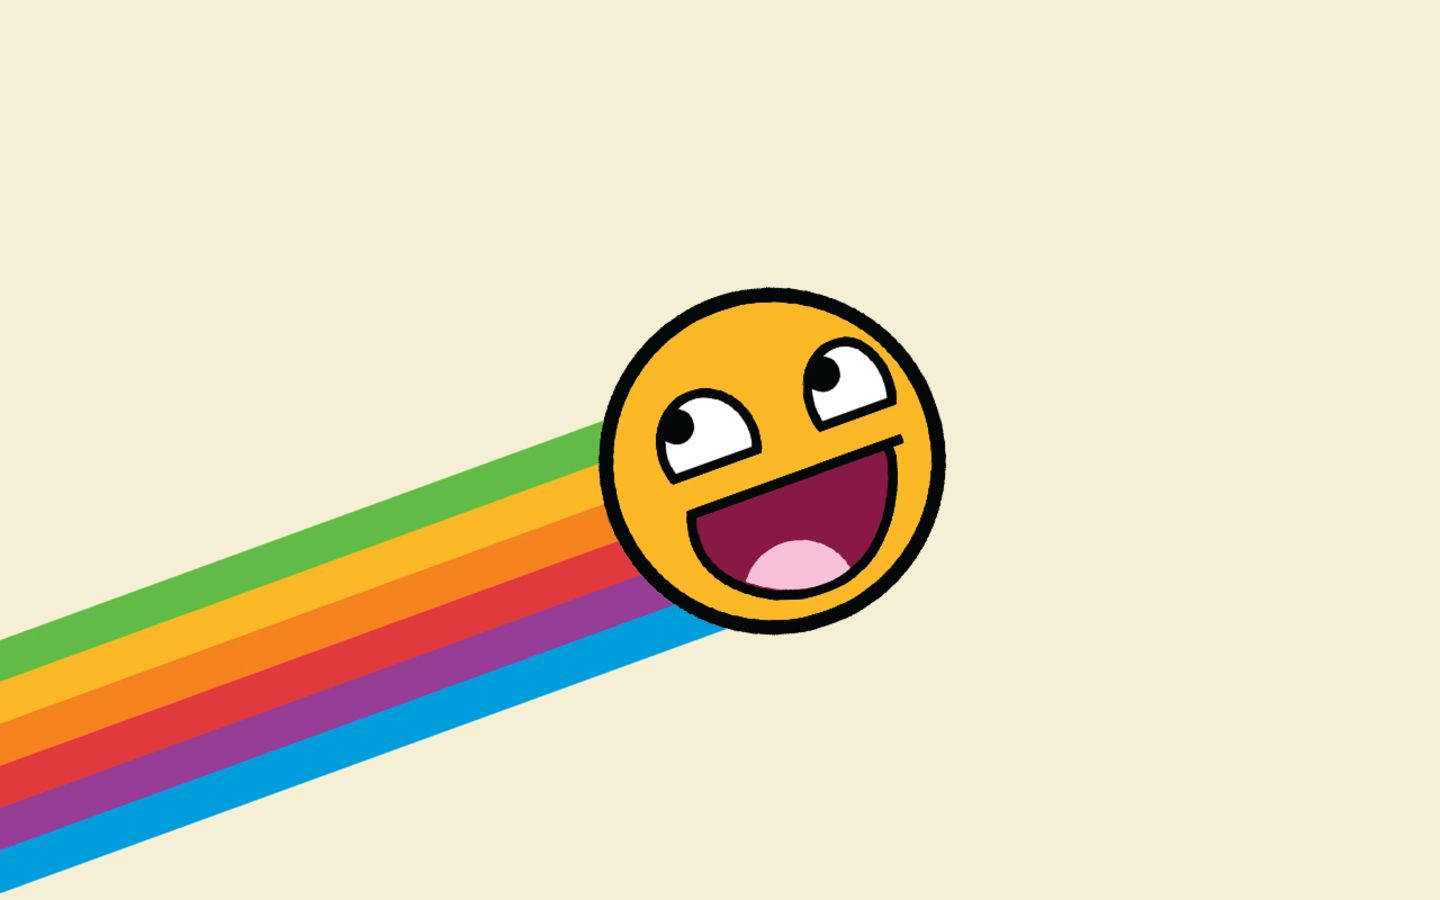 Smiley Face With Rainbow Trail Background